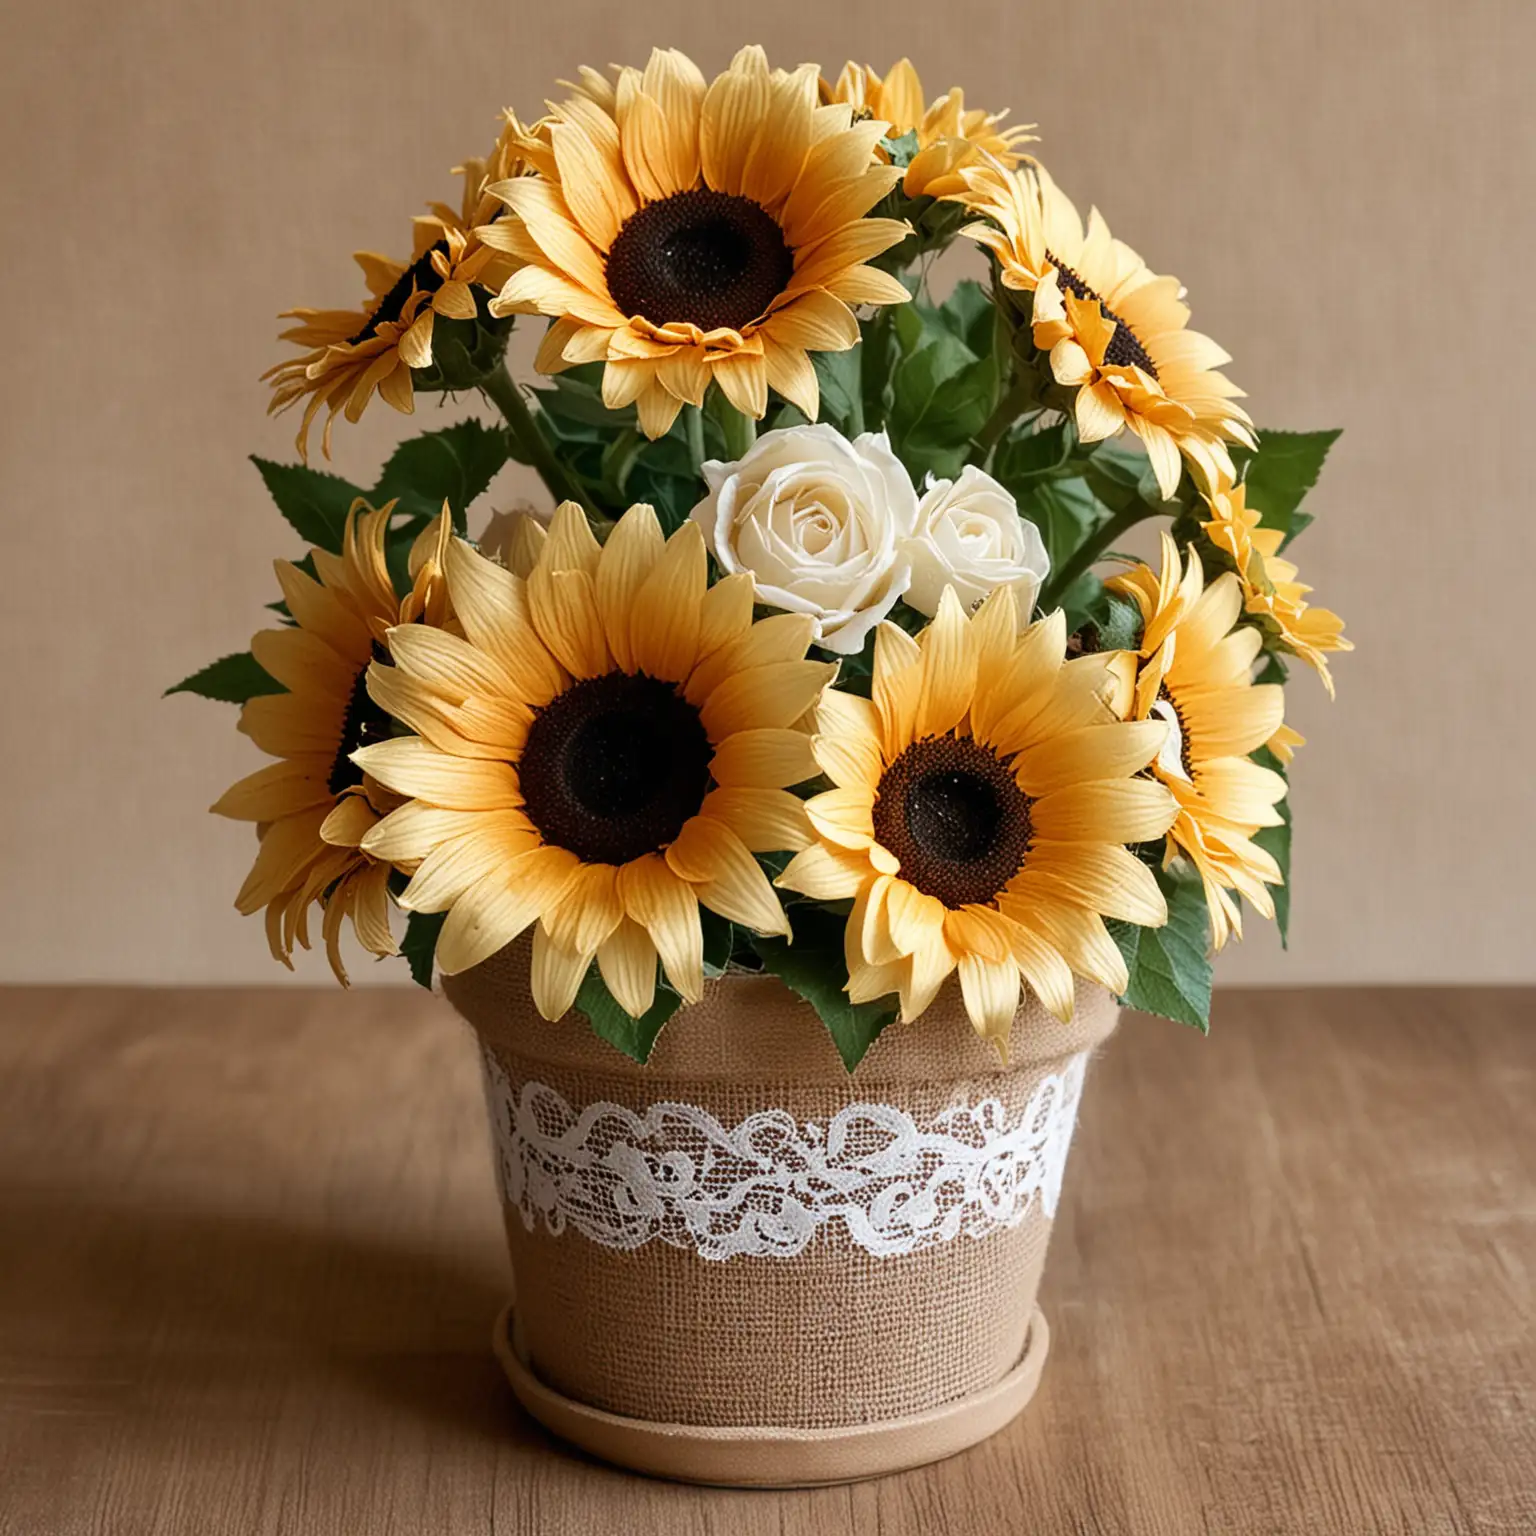 Rustic-Wedding-Centerpiece-Terra-Cotta-Pot-with-Sunflowers-and-Ivory-Roses